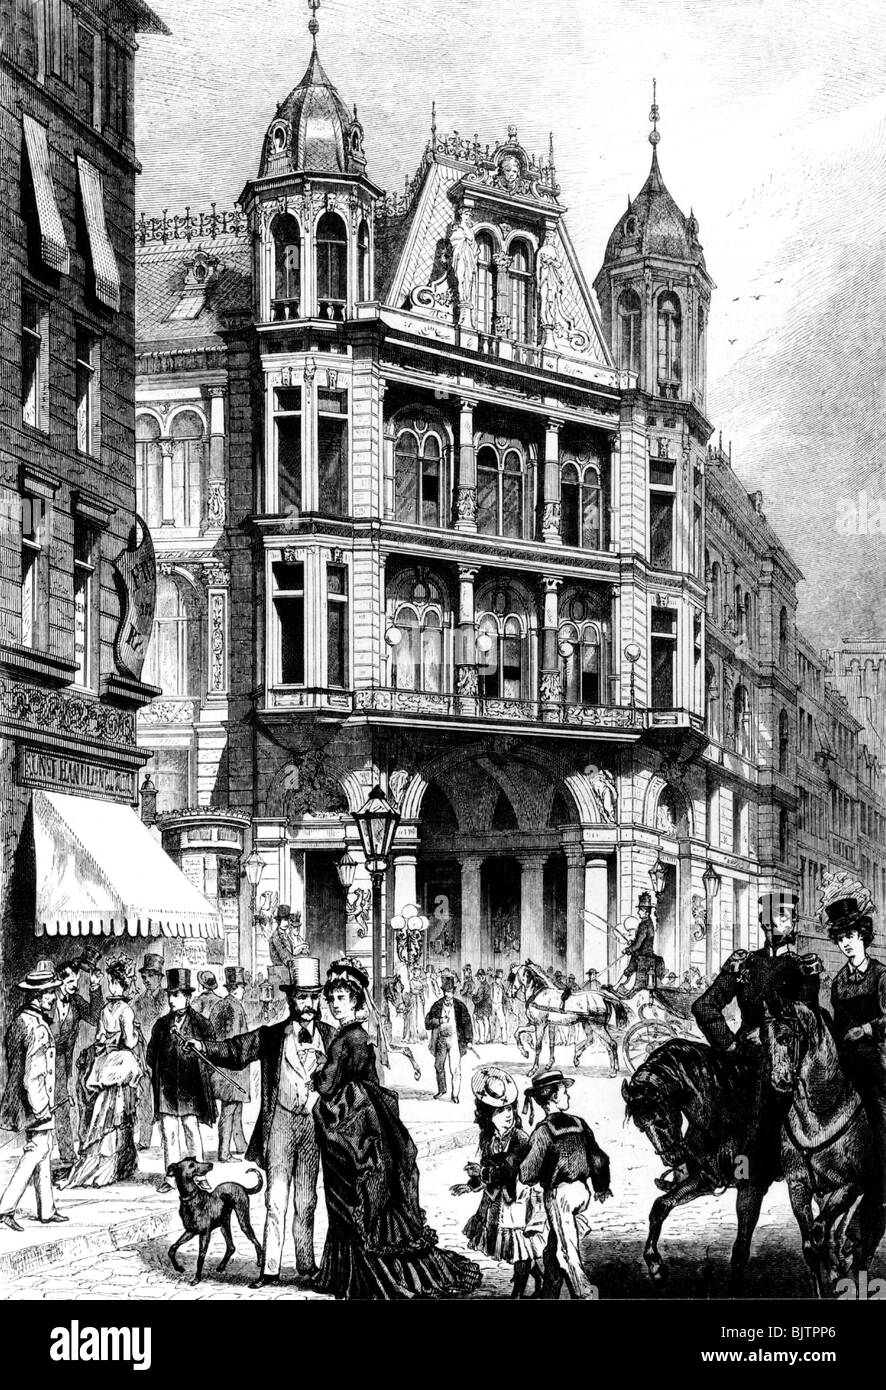 geography / travel, Germany, Berlin, Kaisergalerie with shopping arcades Friedrichstrasse / Behrenstrasse, inaugurated: 1873, wood engraving after drawing by Prof. Doeppler, circa 1874, 19th century, historic, historical, 1870s, years of rapid industrial expansion in Germany, trade, passage, street scene, streets, scenes, transport, transportation, rider, Prussia, Imperial Era, Imperial Period, German Empire, crowds, crowd of people, pedestrian, pedestrians, passer-by, passerby, passers-by, Central Europe, capital, metropolis, inner city, midtown, city centre, , Stock Photo